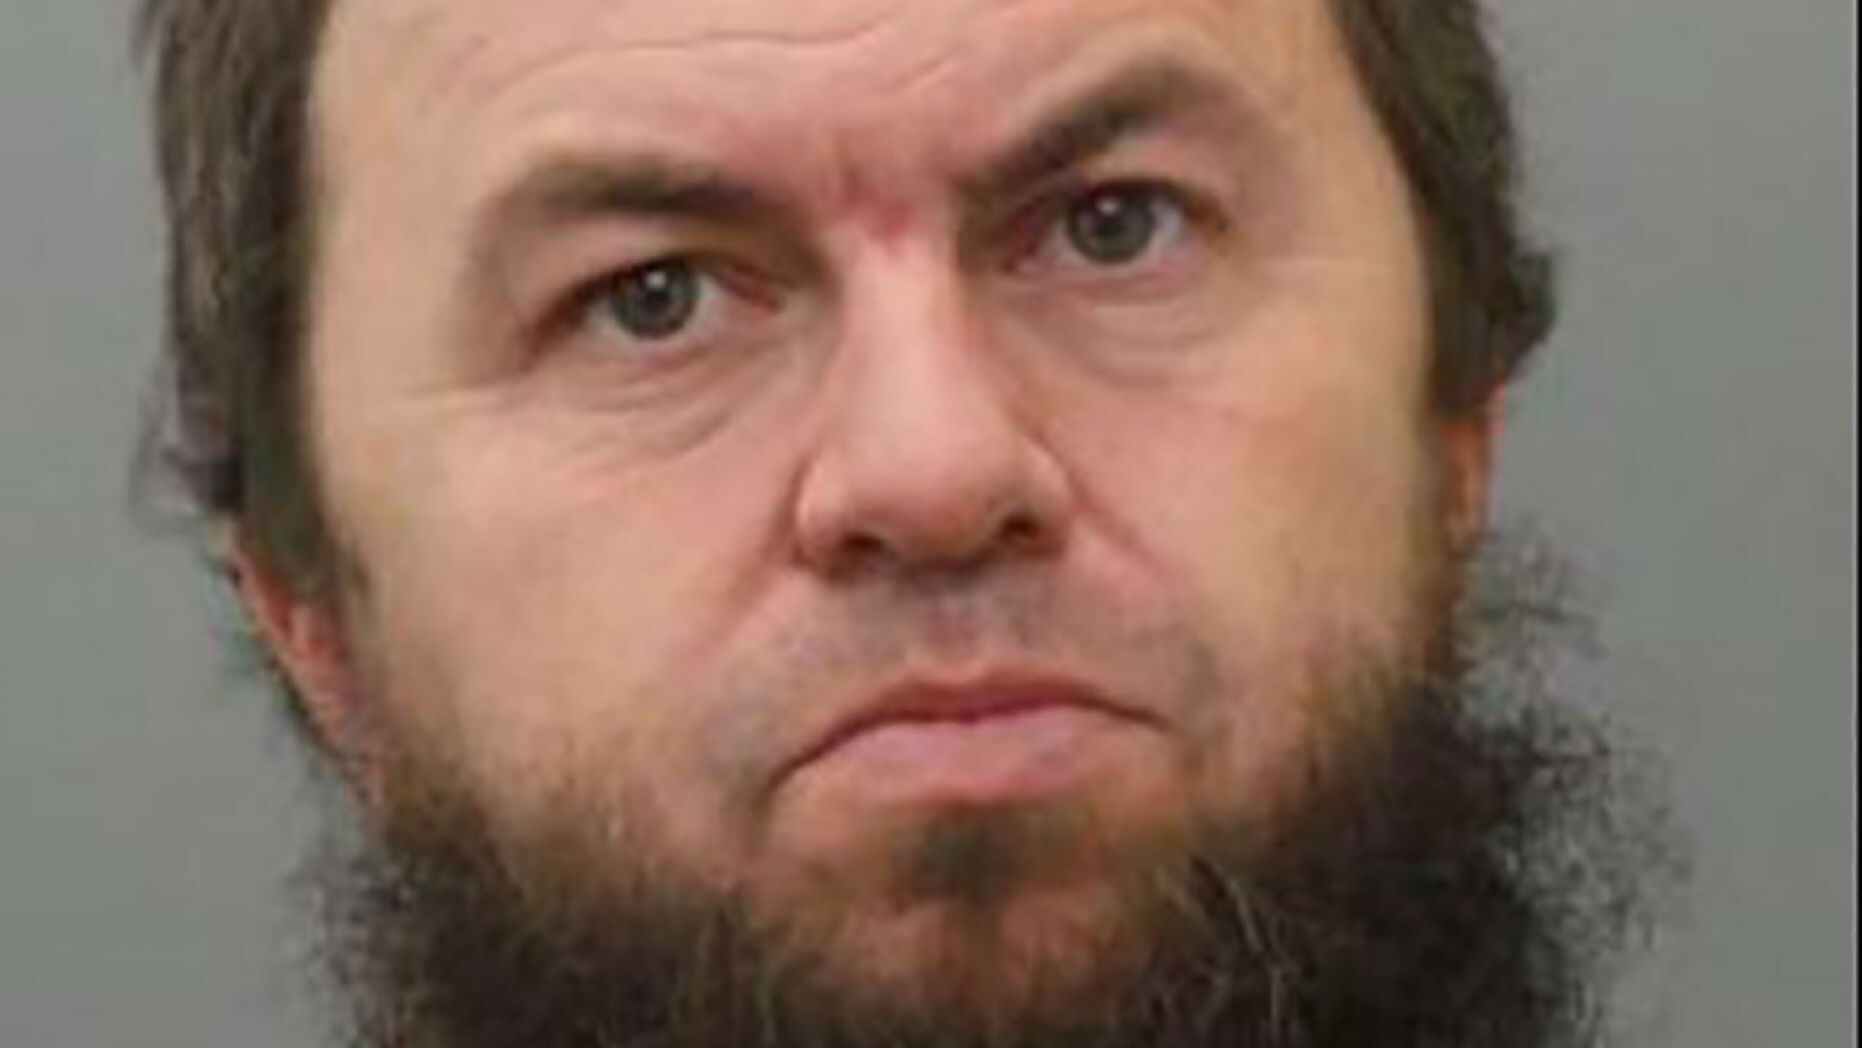 LLL - GFATF - Missouri man from Bosnia who aided the Islamic State gets eight years in prison and faces deportation